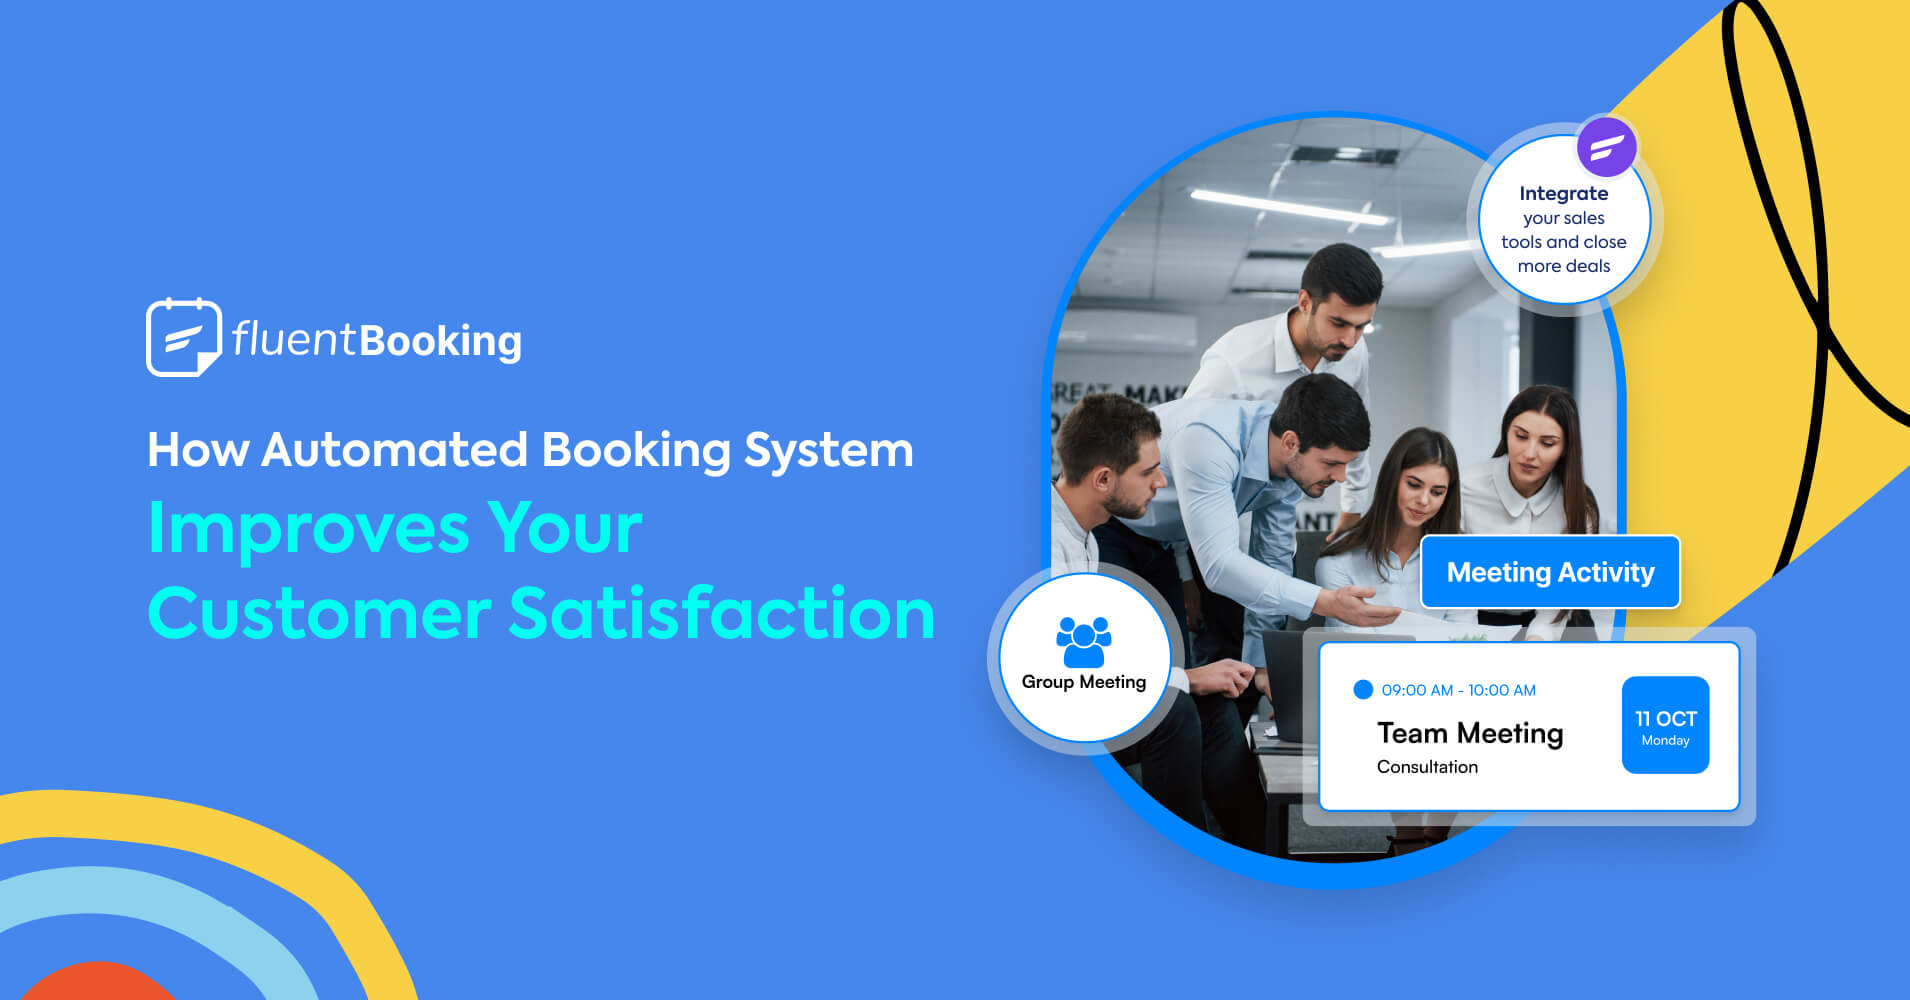 How Automated Booking System Improves Your Customer Satisfaction